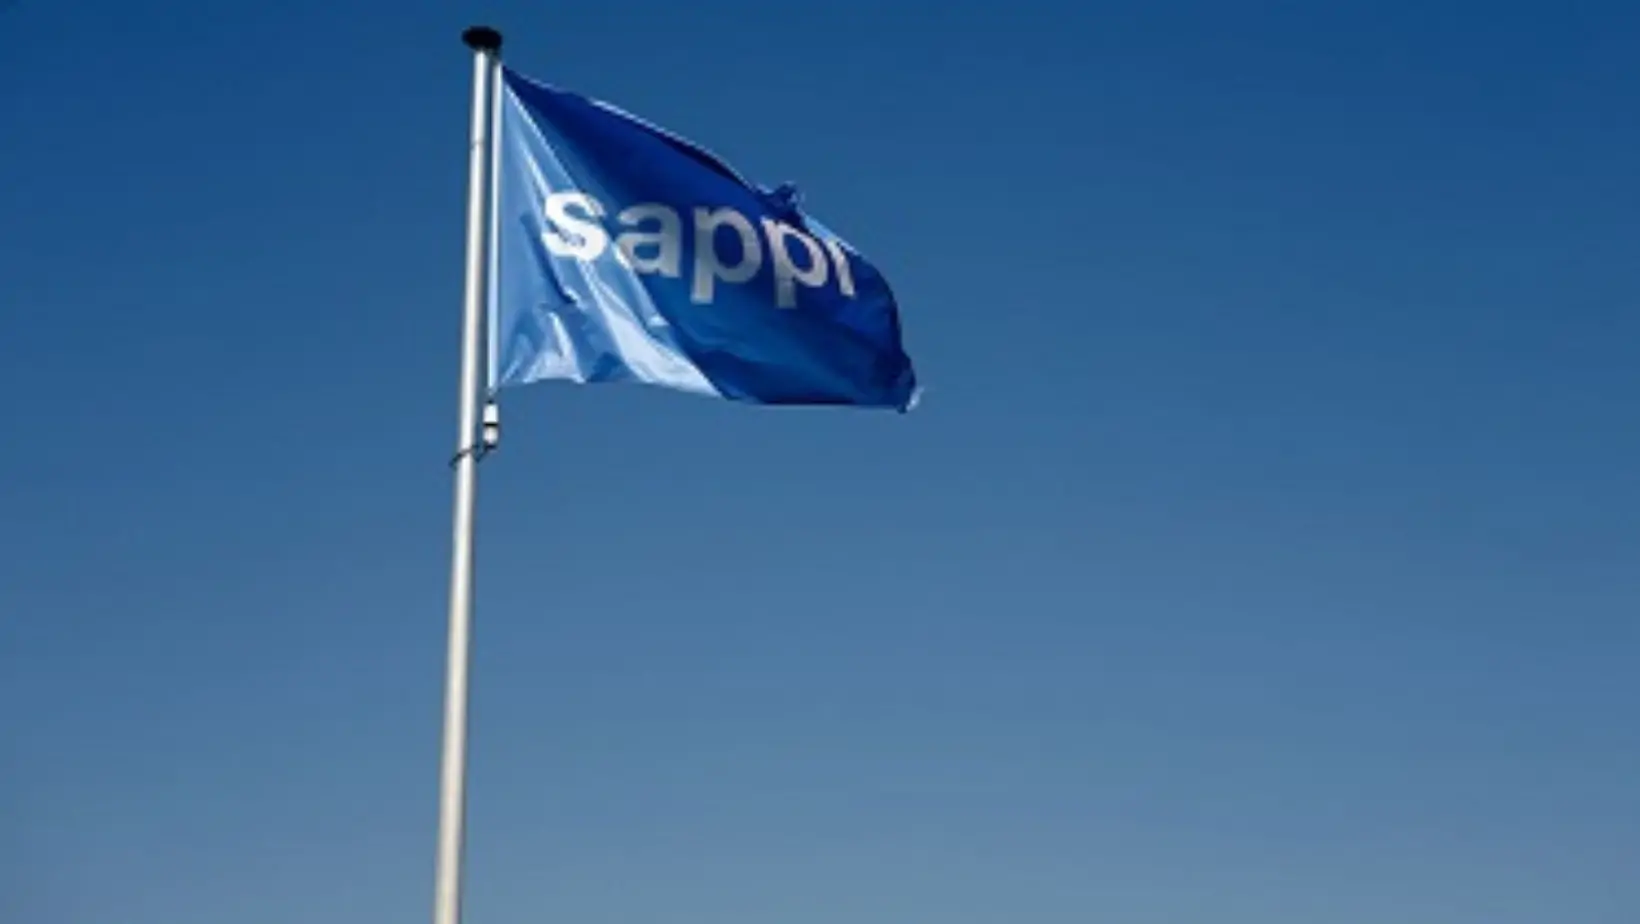 Sappi Limited Reports Decline in First Quarter Earnings Amidst Challenging Market Conditions